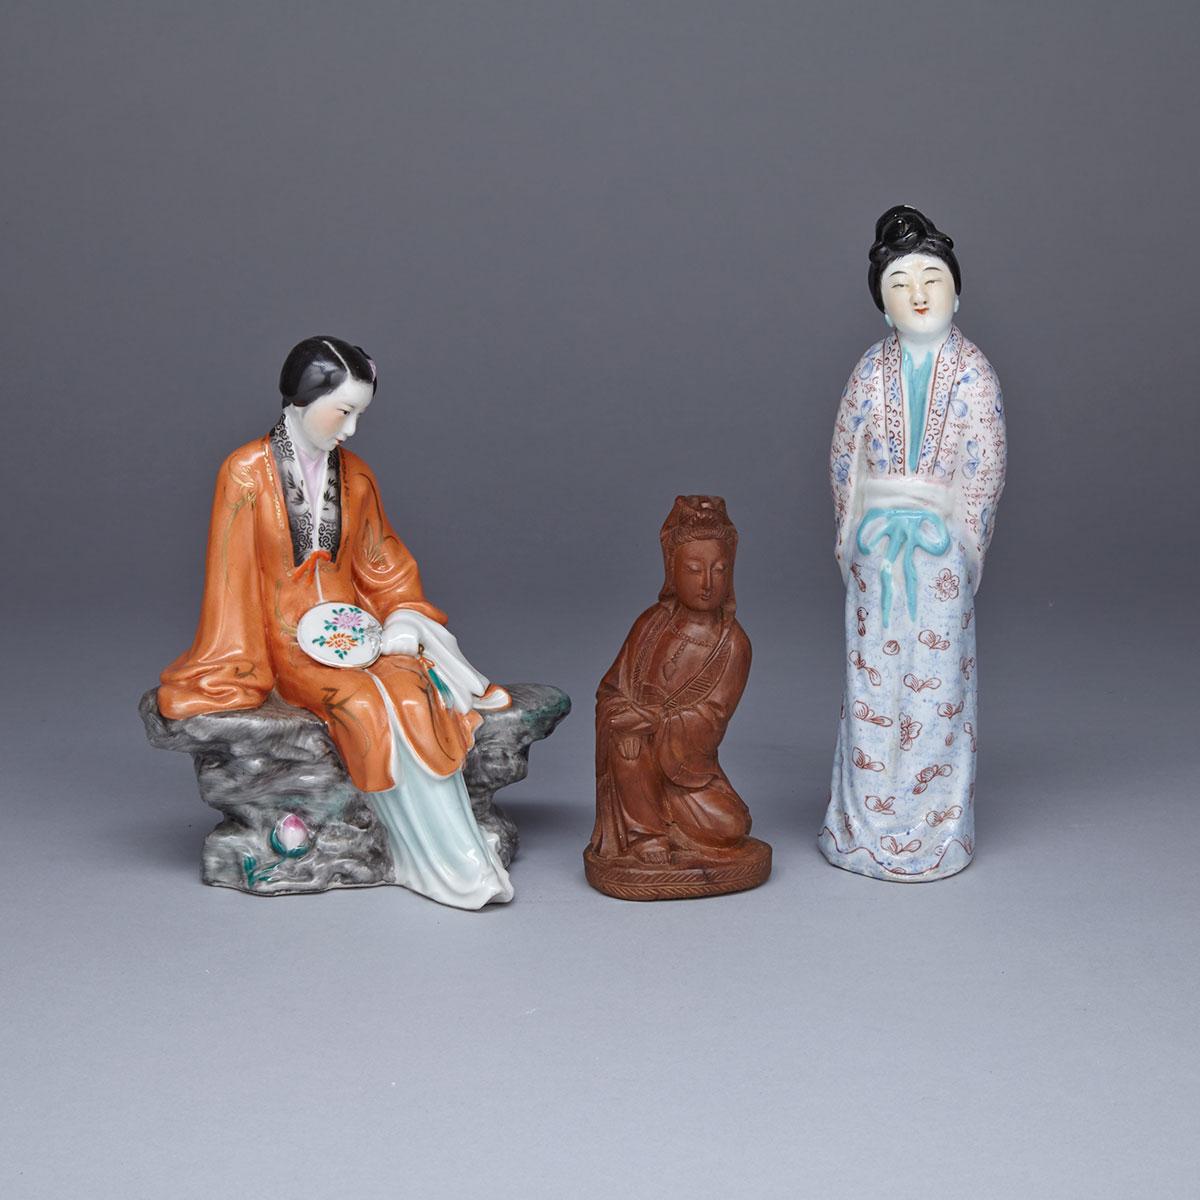 Two Porcelain Figures and Small Wood Figure